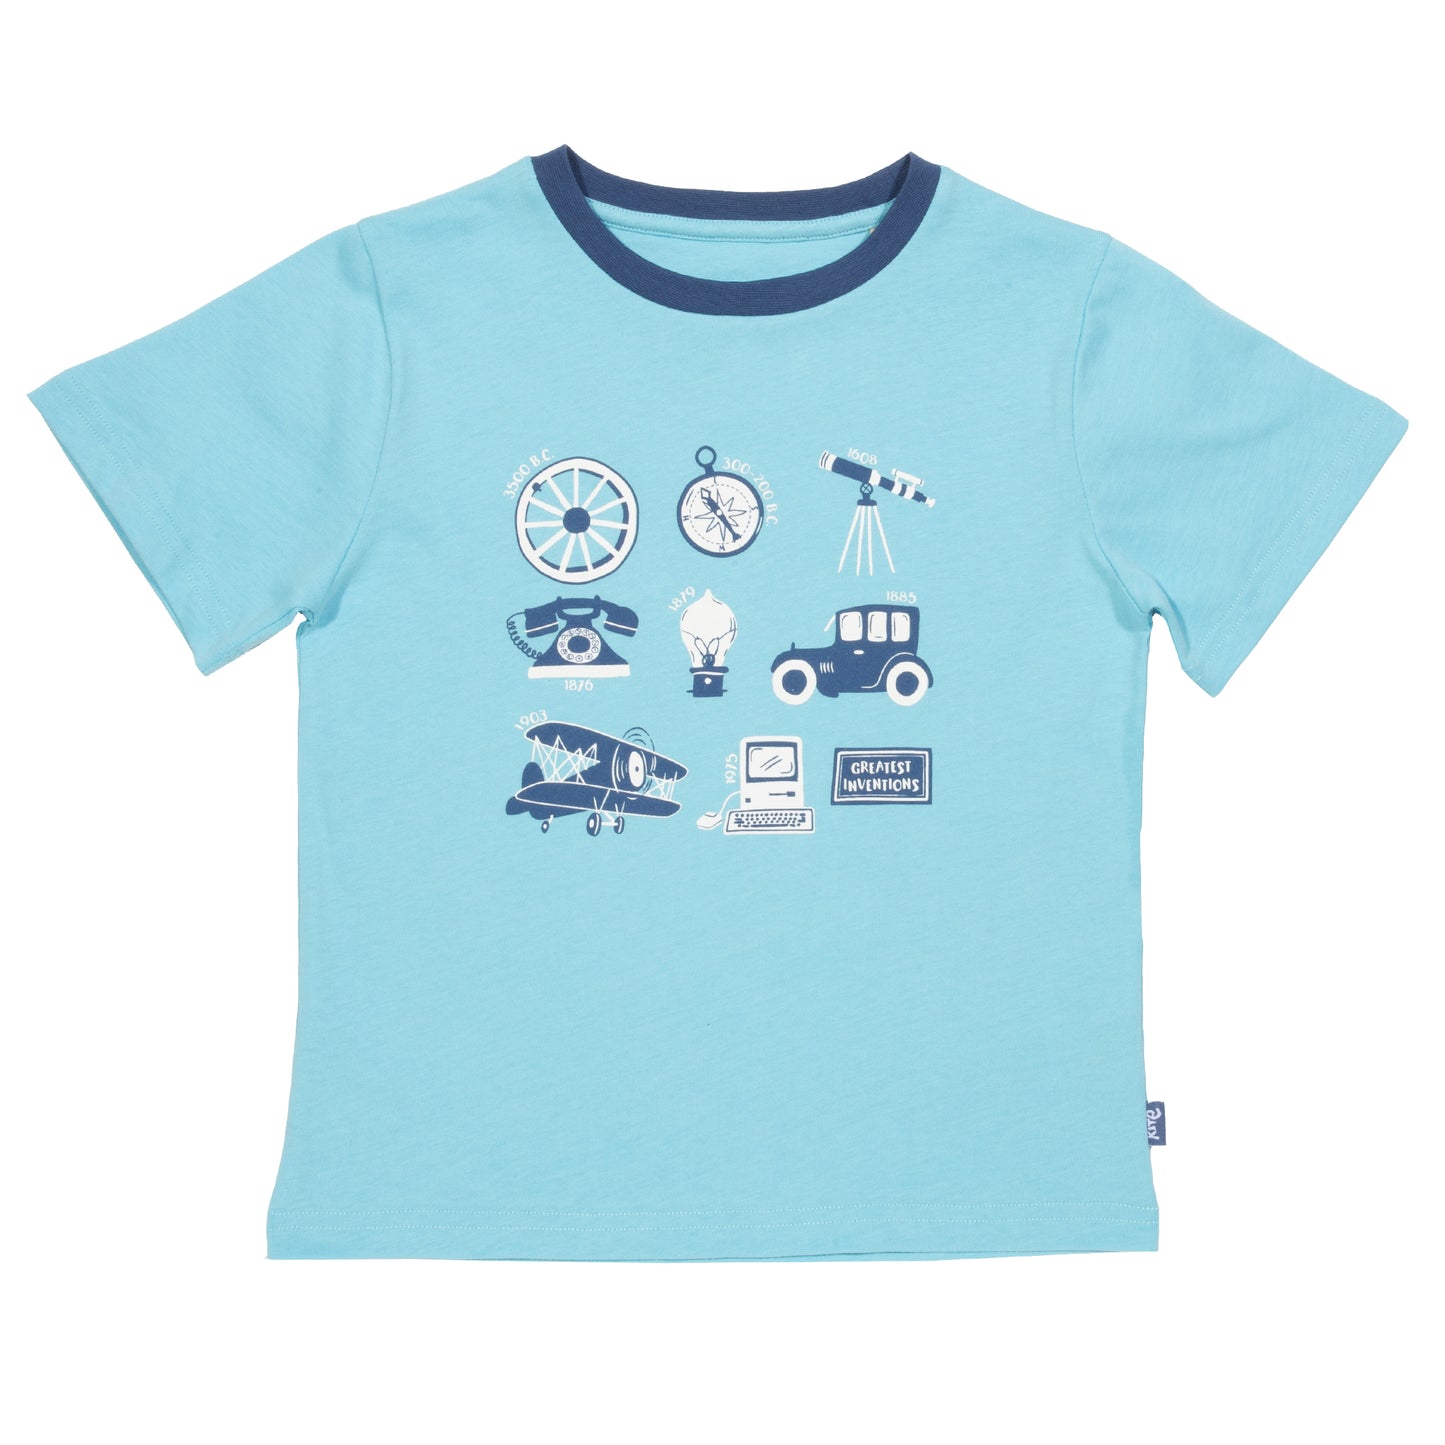 Inventions t-shirt